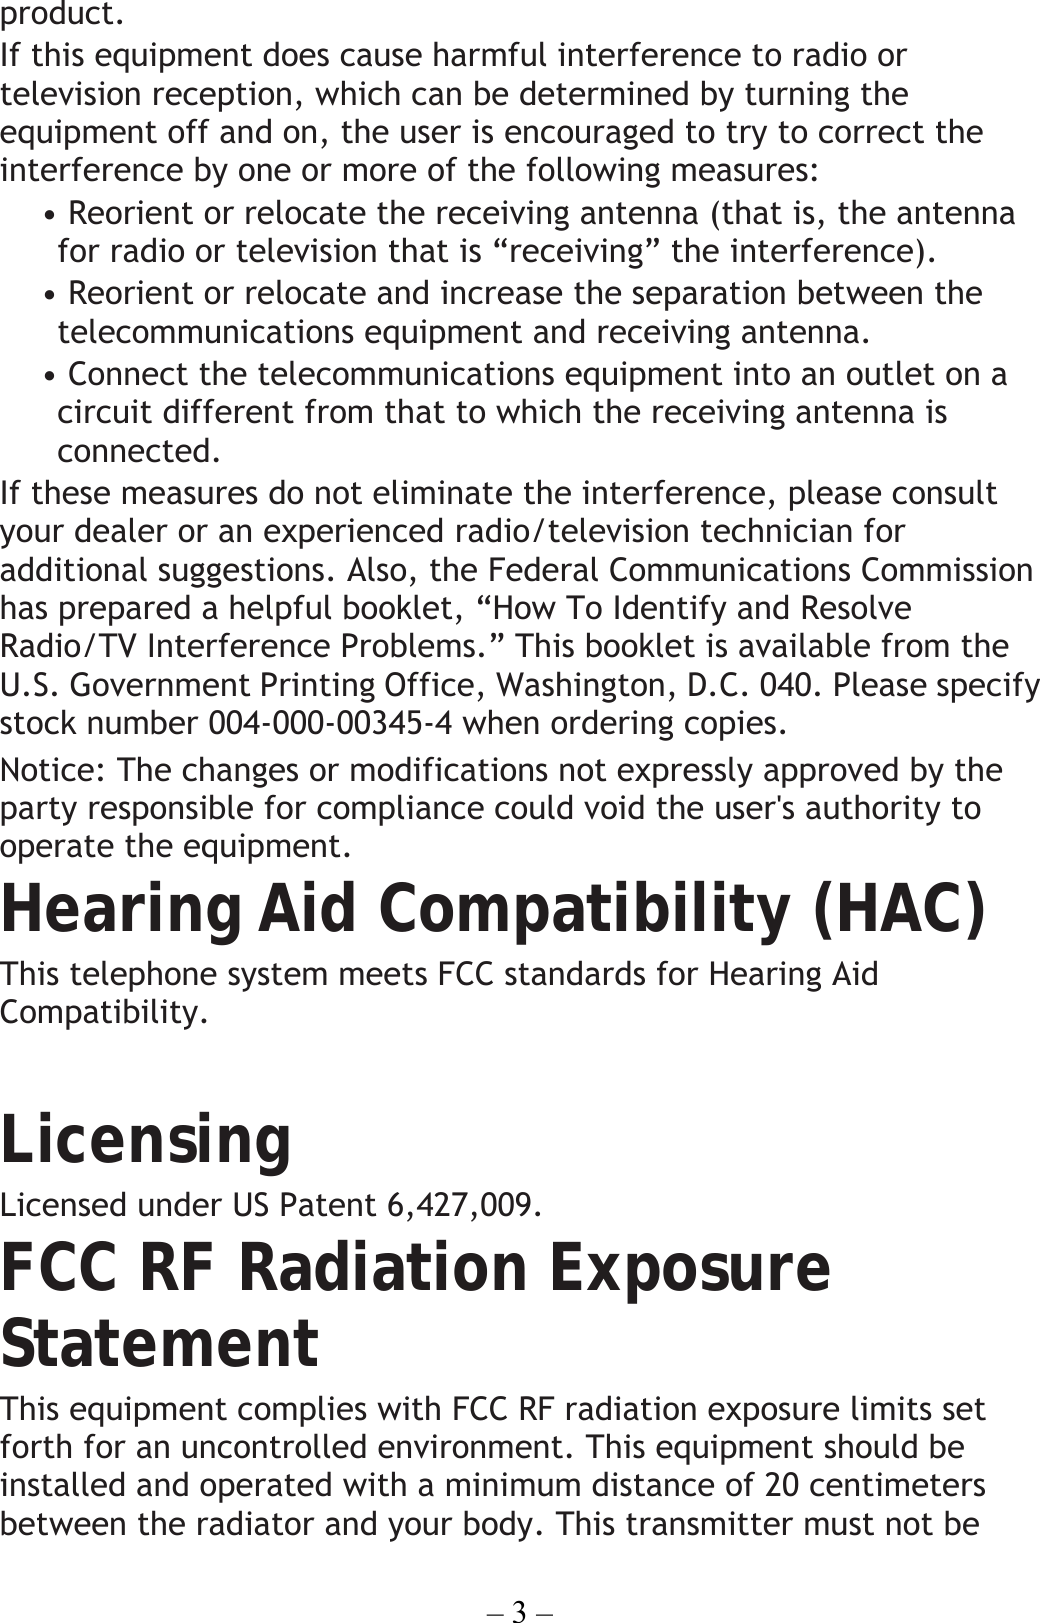 – 3 – product. If this equipment does cause harmful interference to radio or television reception, which can be determined by turning the equipment off and on, the user is encouraged to try to correct the interference by one or more of the following measures: • Reorient or relocate the receiving antenna (that is, the antenna for radio or television that is “receiving” the interference). • Reorient or relocate and increase the separation between the telecommunications equipment and receiving antenna. • Connect the telecommunications equipment into an outlet on a circuit different from that to which the receiving antenna is connected. If these measures do not eliminate the interference, please consult your dealer or an experienced radio/television technician for additional suggestions. Also, the Federal Communications Commission has prepared a helpful booklet, “How To Identify and Resolve Radio/TV Interference Problems.” This booklet is available from the U.S. Government Printing Office, Washington, D.C. 040. Please specify stock number 004-000-00345-4 when ordering copies. Notice: The changes or modifications not expressly approved by the party responsible for compliance could void the user&apos;s authority to operate the equipment. Hearing Aid Compatibility (HAC) This telephone system meets FCC standards for Hearing Aid Compatibility.  Licensing Licensed under US Patent 6,427,009. FCC RF Radiation Exposure Statement This equipment complies with FCC RF radiation exposure limits set forth for an uncontrolled environment. This equipment should be installed and operated with a minimum distance of 20 centimeters between the radiator and your body. This transmitter must not be 